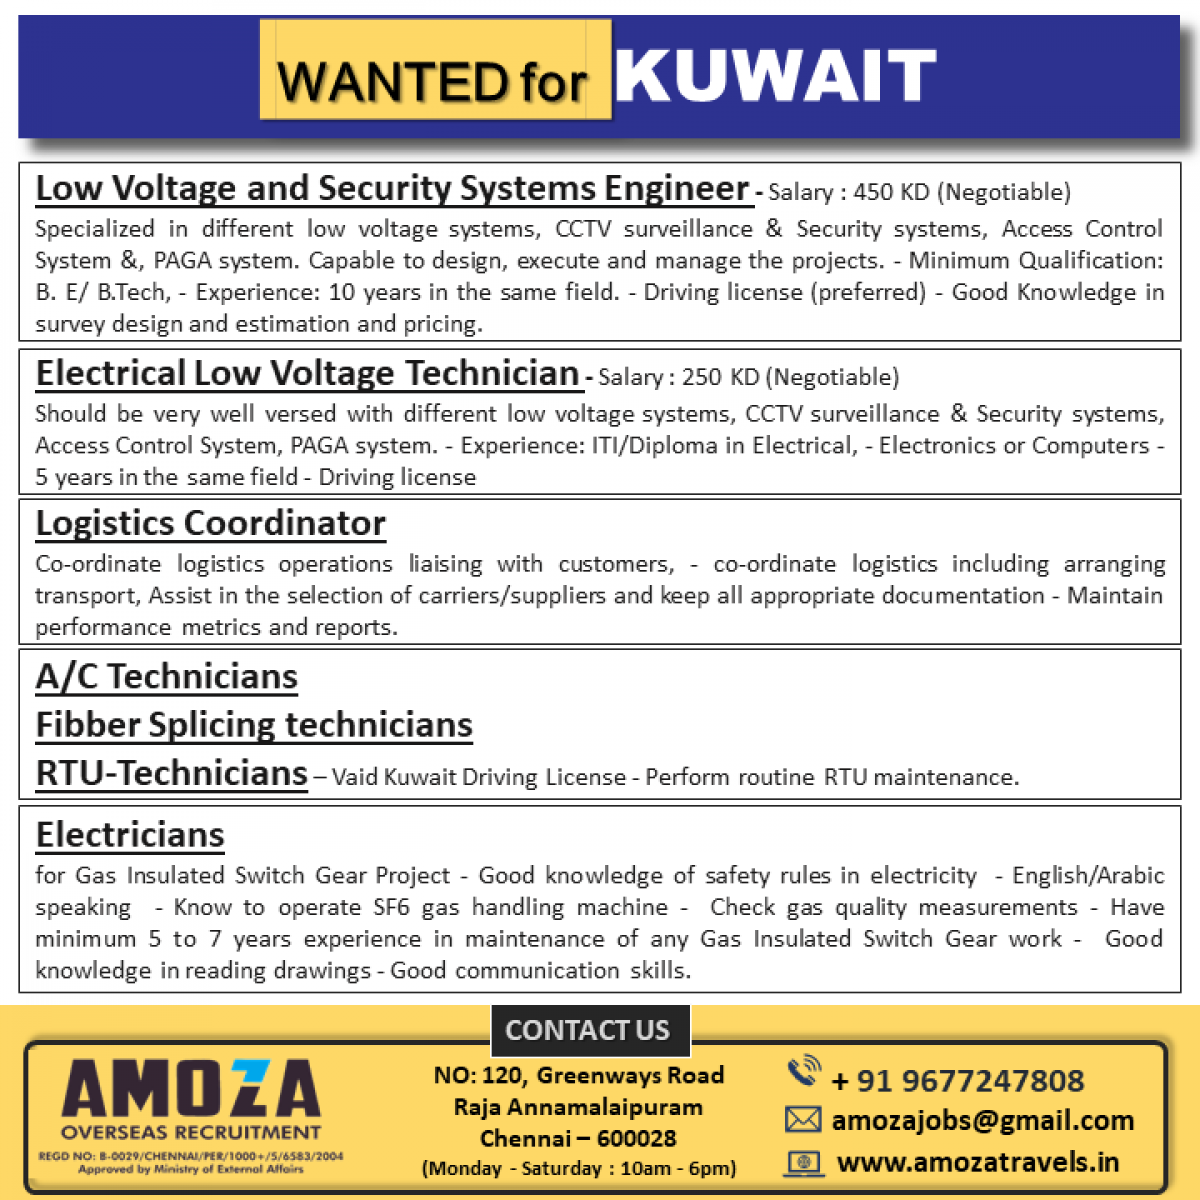 Low Voltage and Security Systems Engineer